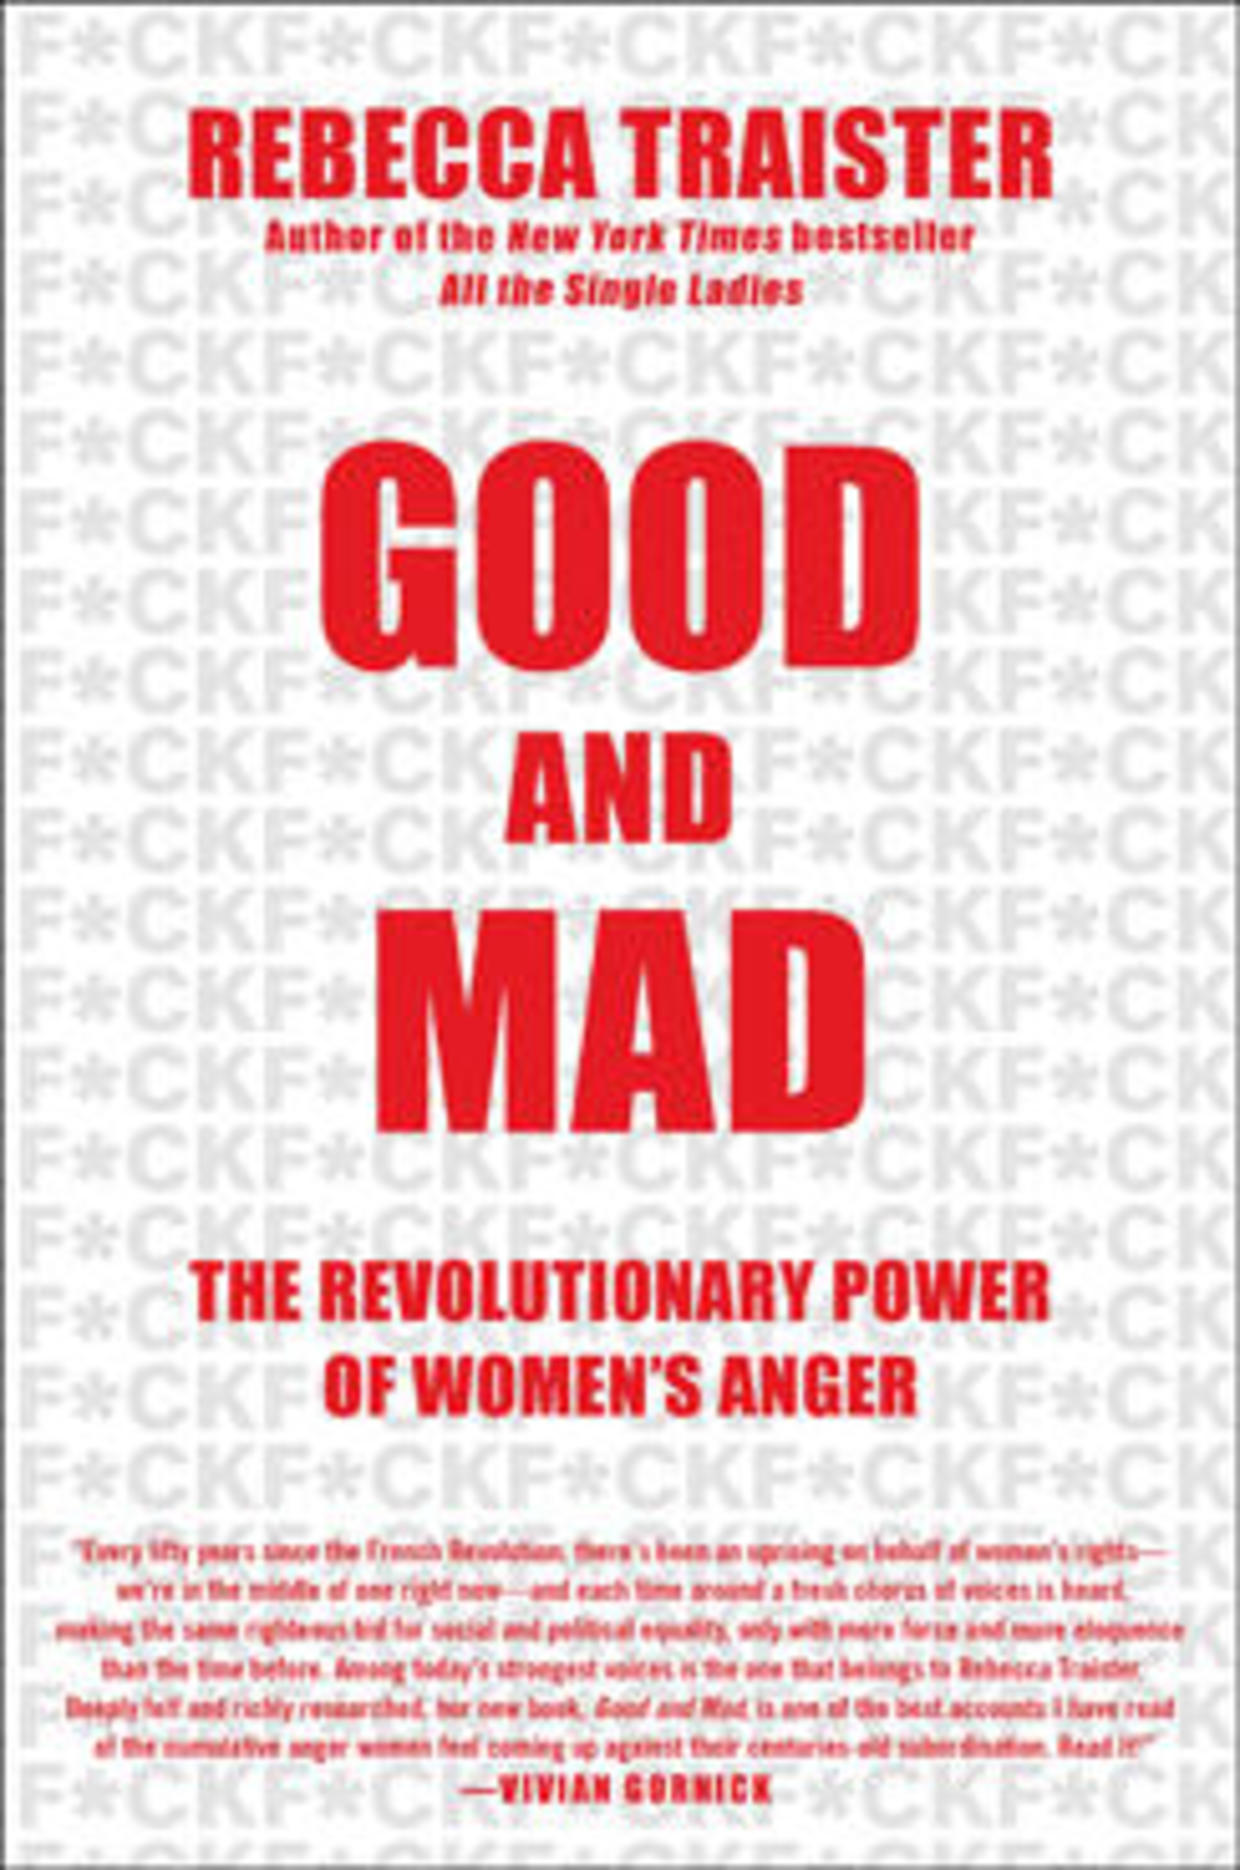 traister good and mad